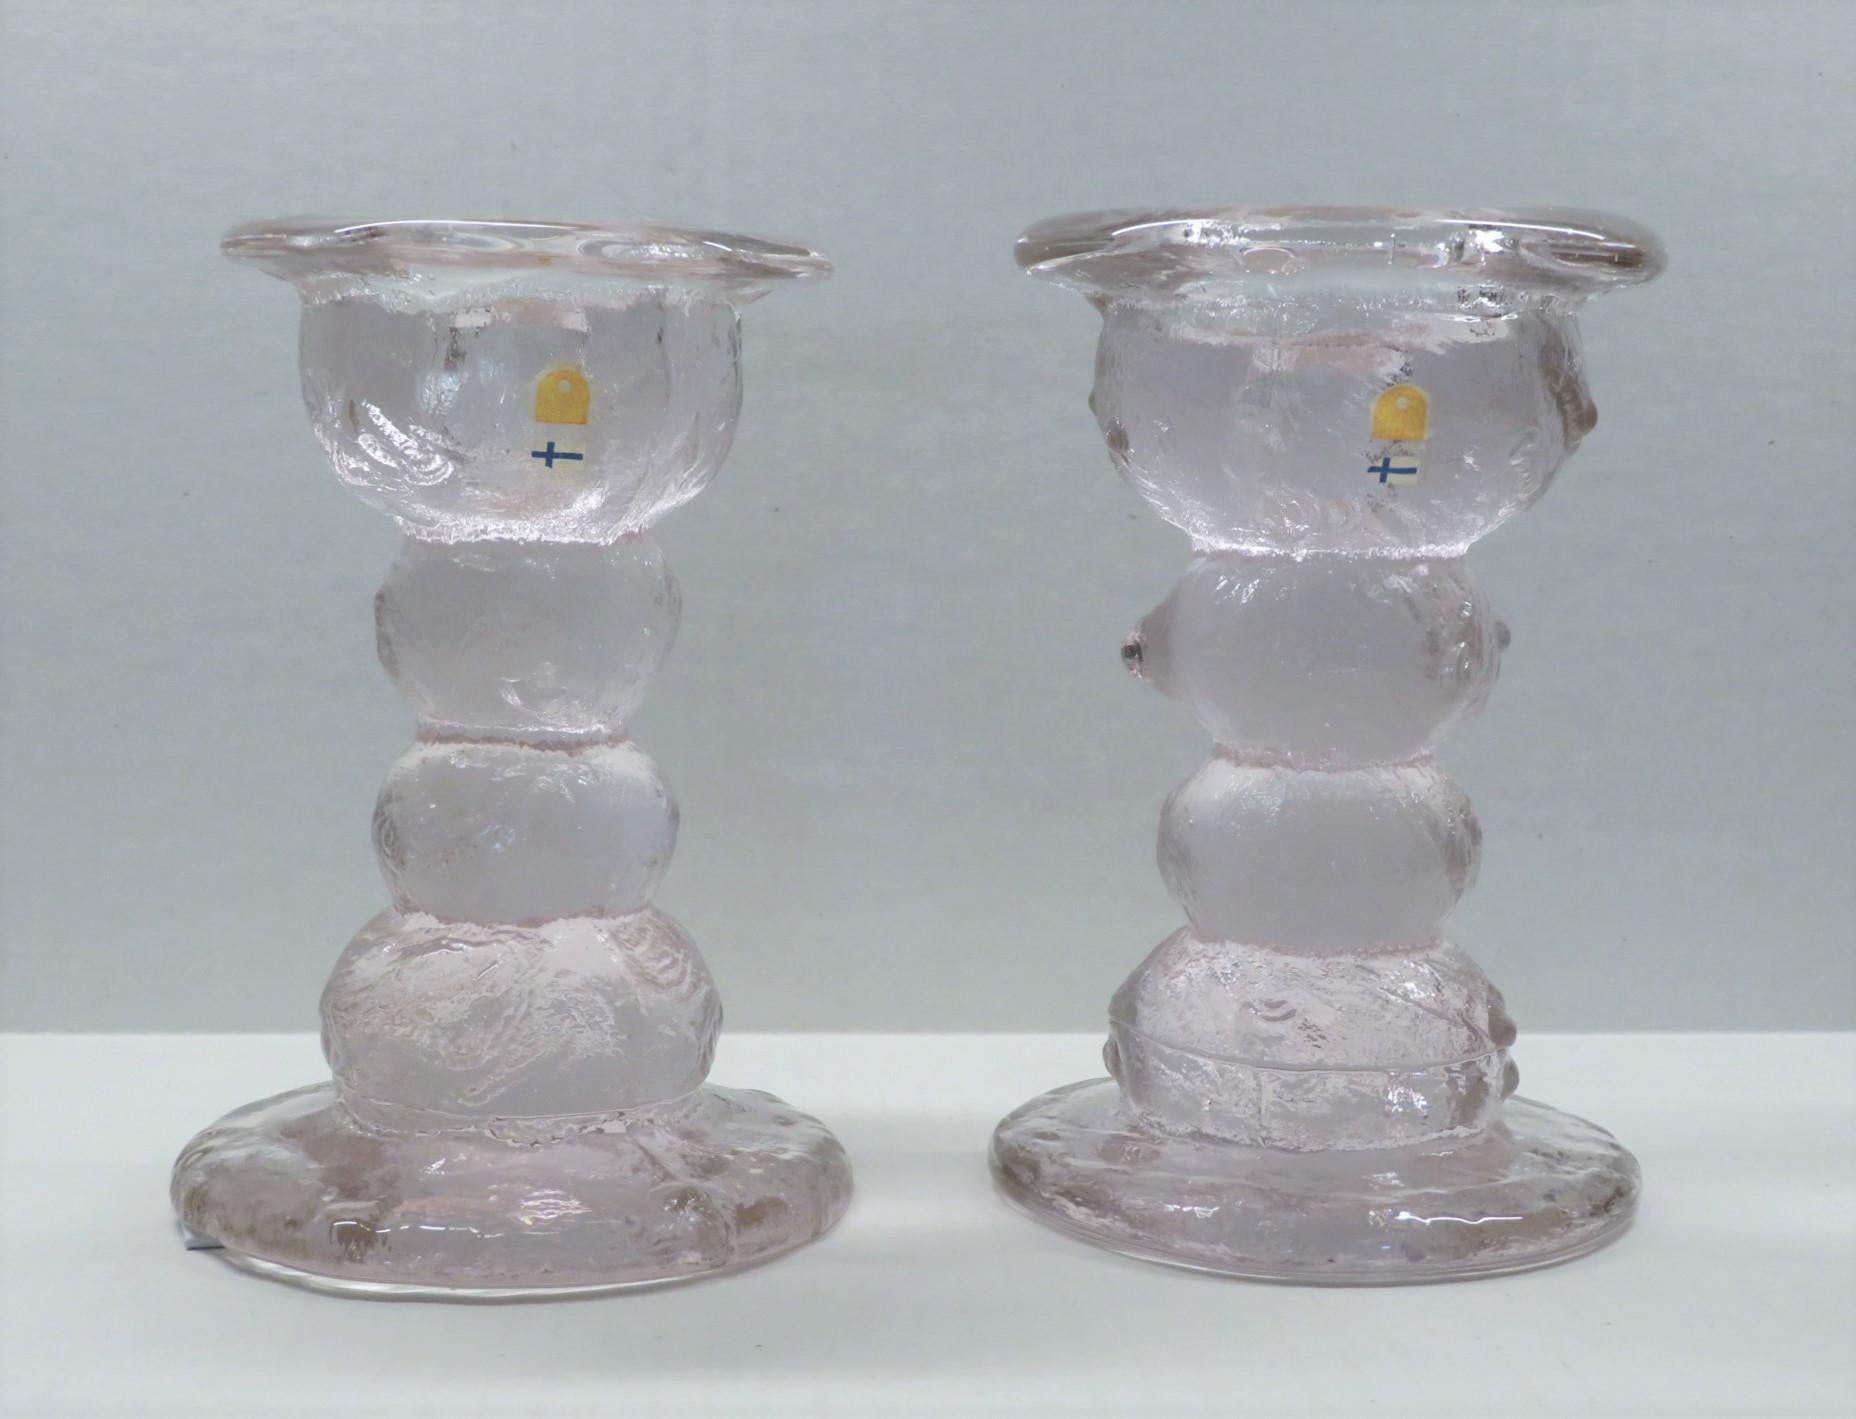 1970s Modern, globular and brutalist designed Candlesticks by Pertti Santalahti for the Finnish company Humppila. Part of the KIVI Series, they retain their original tags. Probably mold blown, however they tend to be unique in form. Very heavy